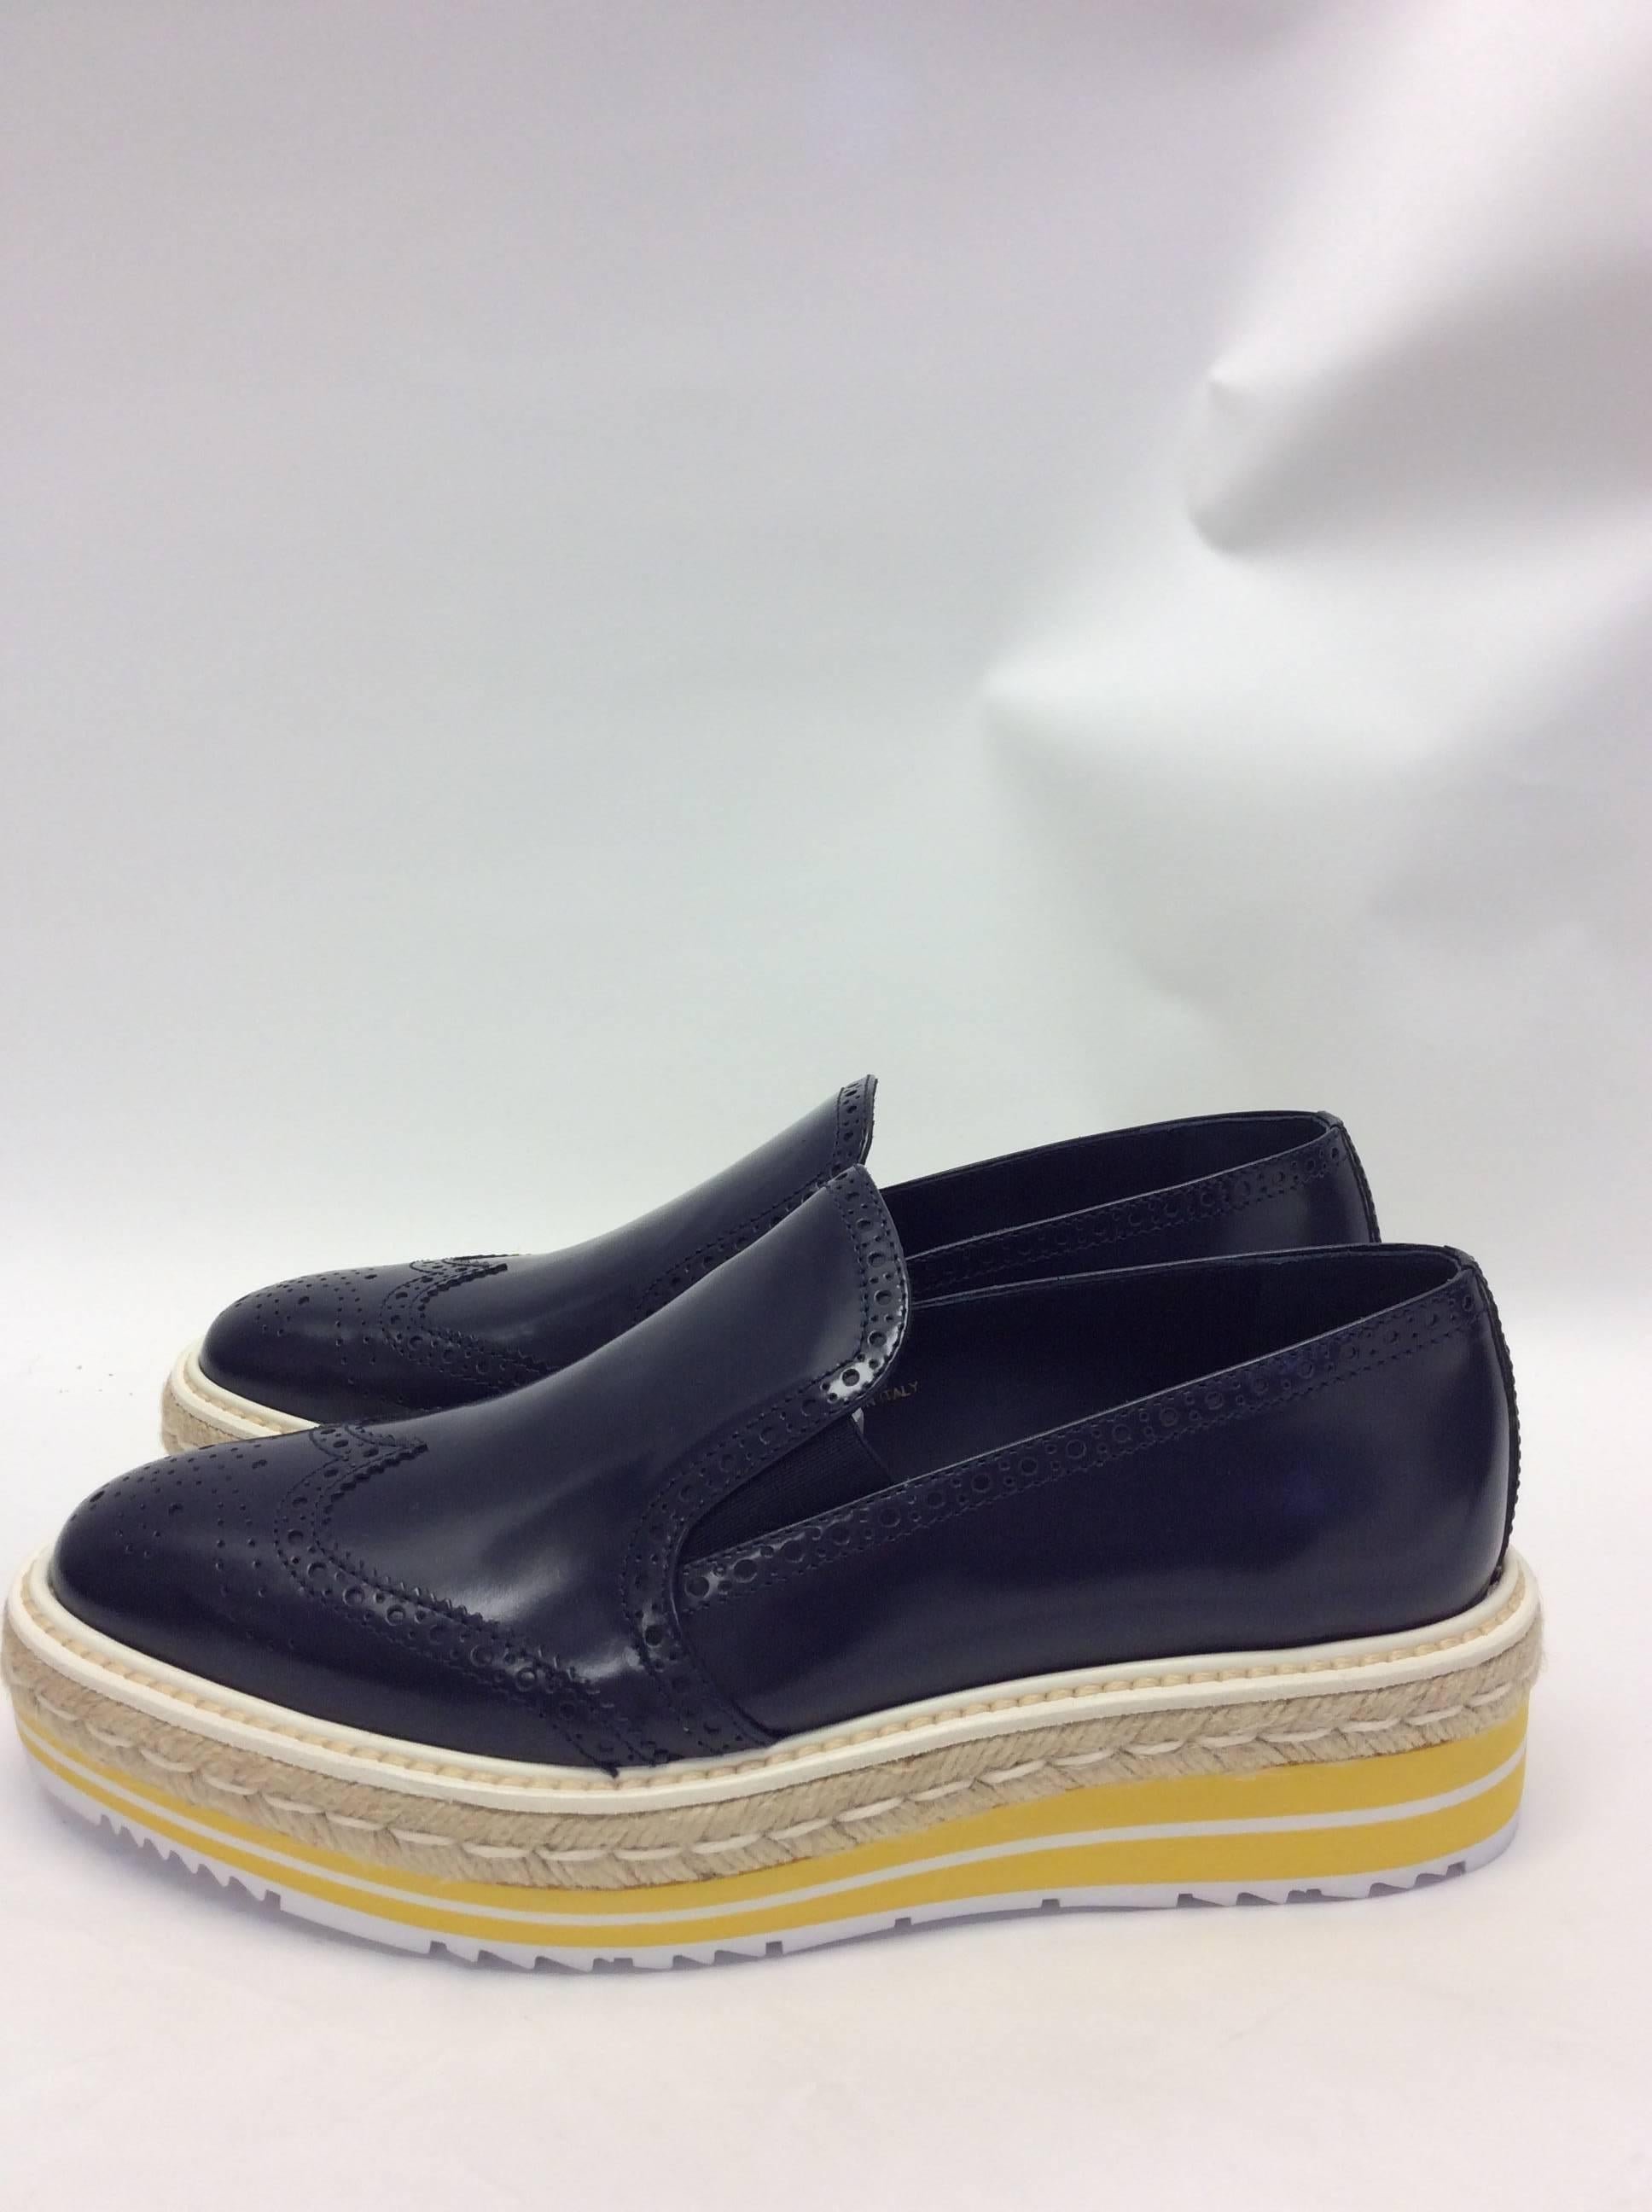 Prada Navy Leather Espadrille NIB Oxford
Size 39
Foam platform with espadrille style
New in Box
Made in Italy
$299